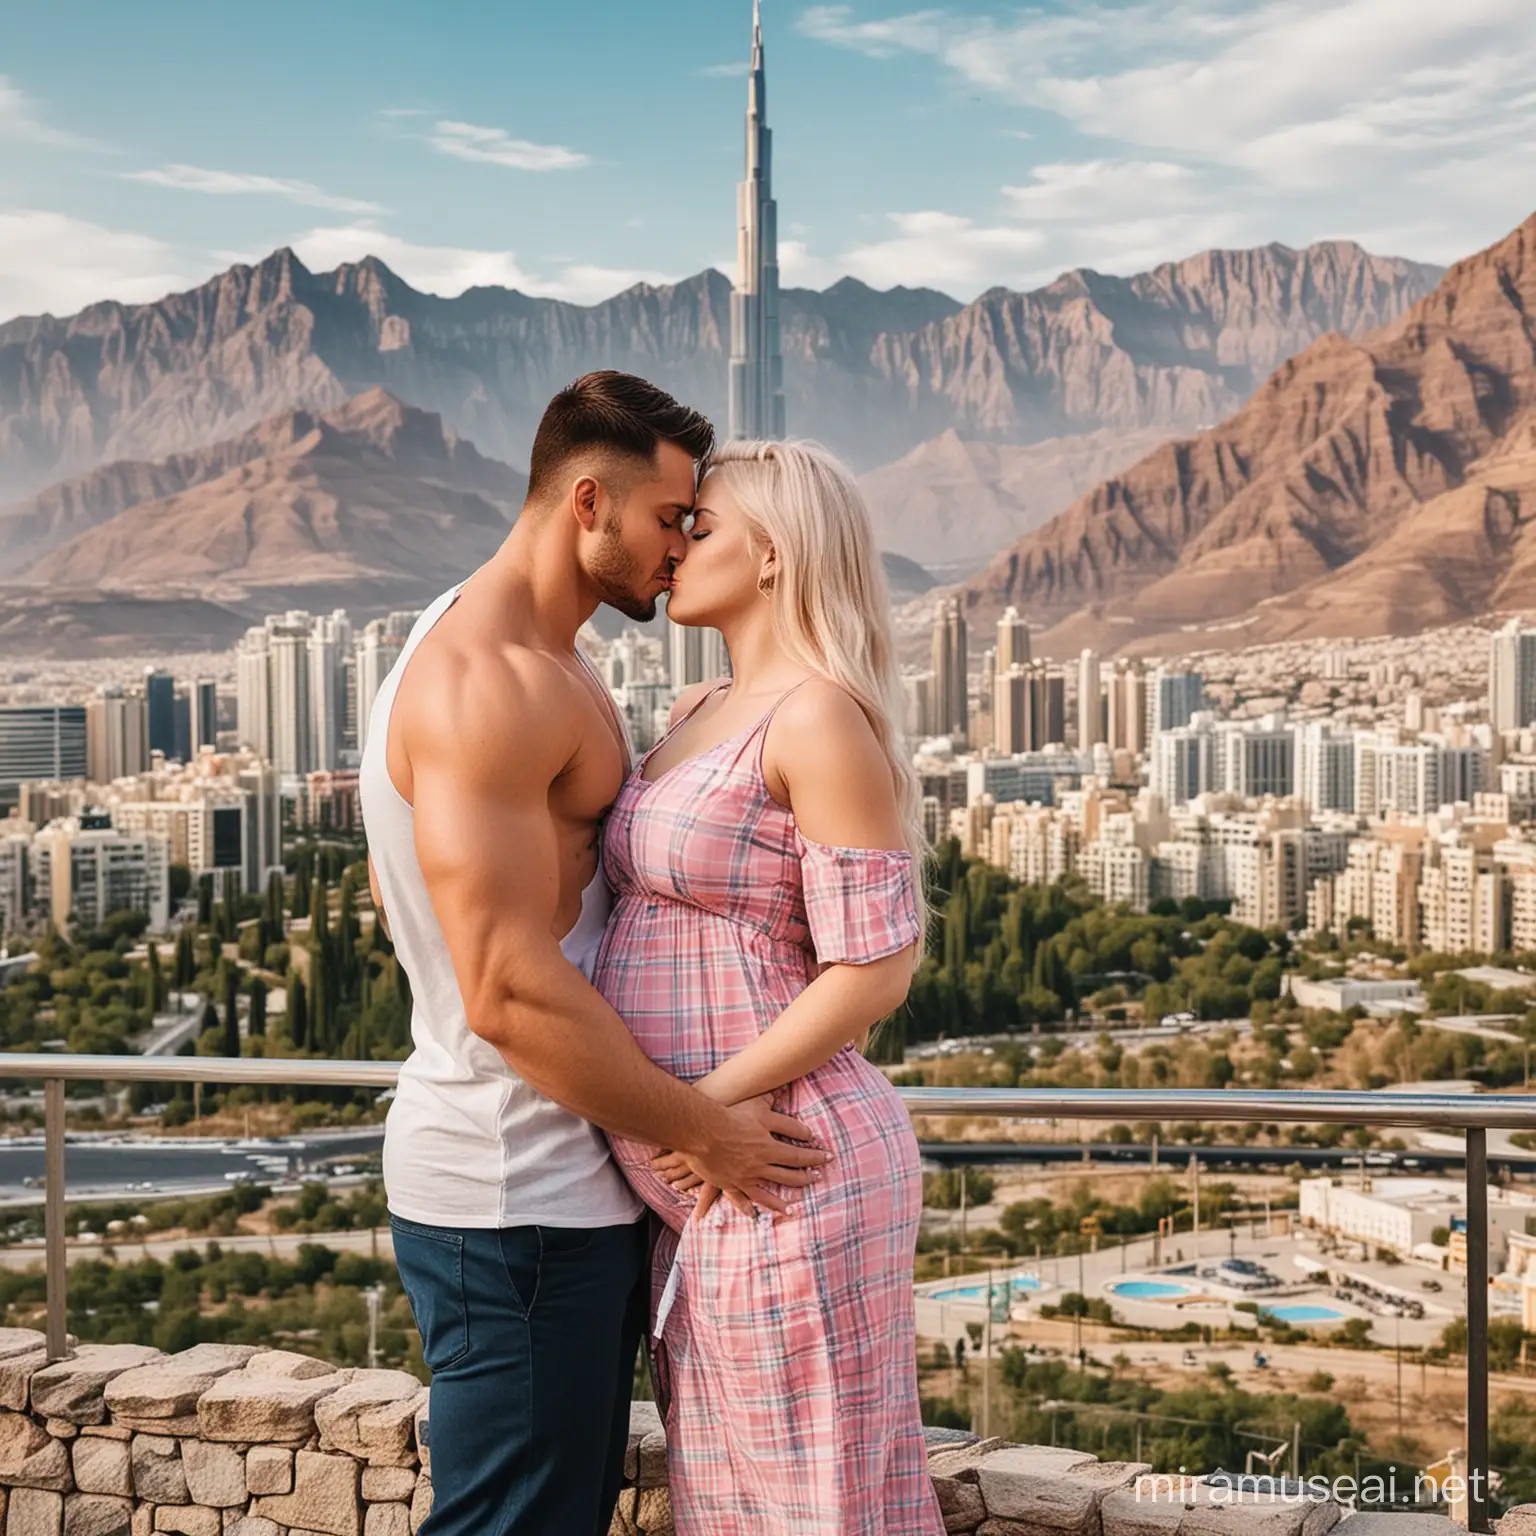 Make a cute couple. The woman has blonde and pink hair and blue eyes. The man is very muscular and has a checkered stomach, light brown and blond hair and blue eyes. The woman is pregnant and her husband hugs her and they kiss 😘. in the background there should be a huge mountain, a skyscraper like the one in Dubai, the Burj Khalifa floor should also have a beautiful sea with palm trees. The married couple built their huge luxury villa on the side of another mountain, they also have their own private plane with a private airport ❤️❤️❤️